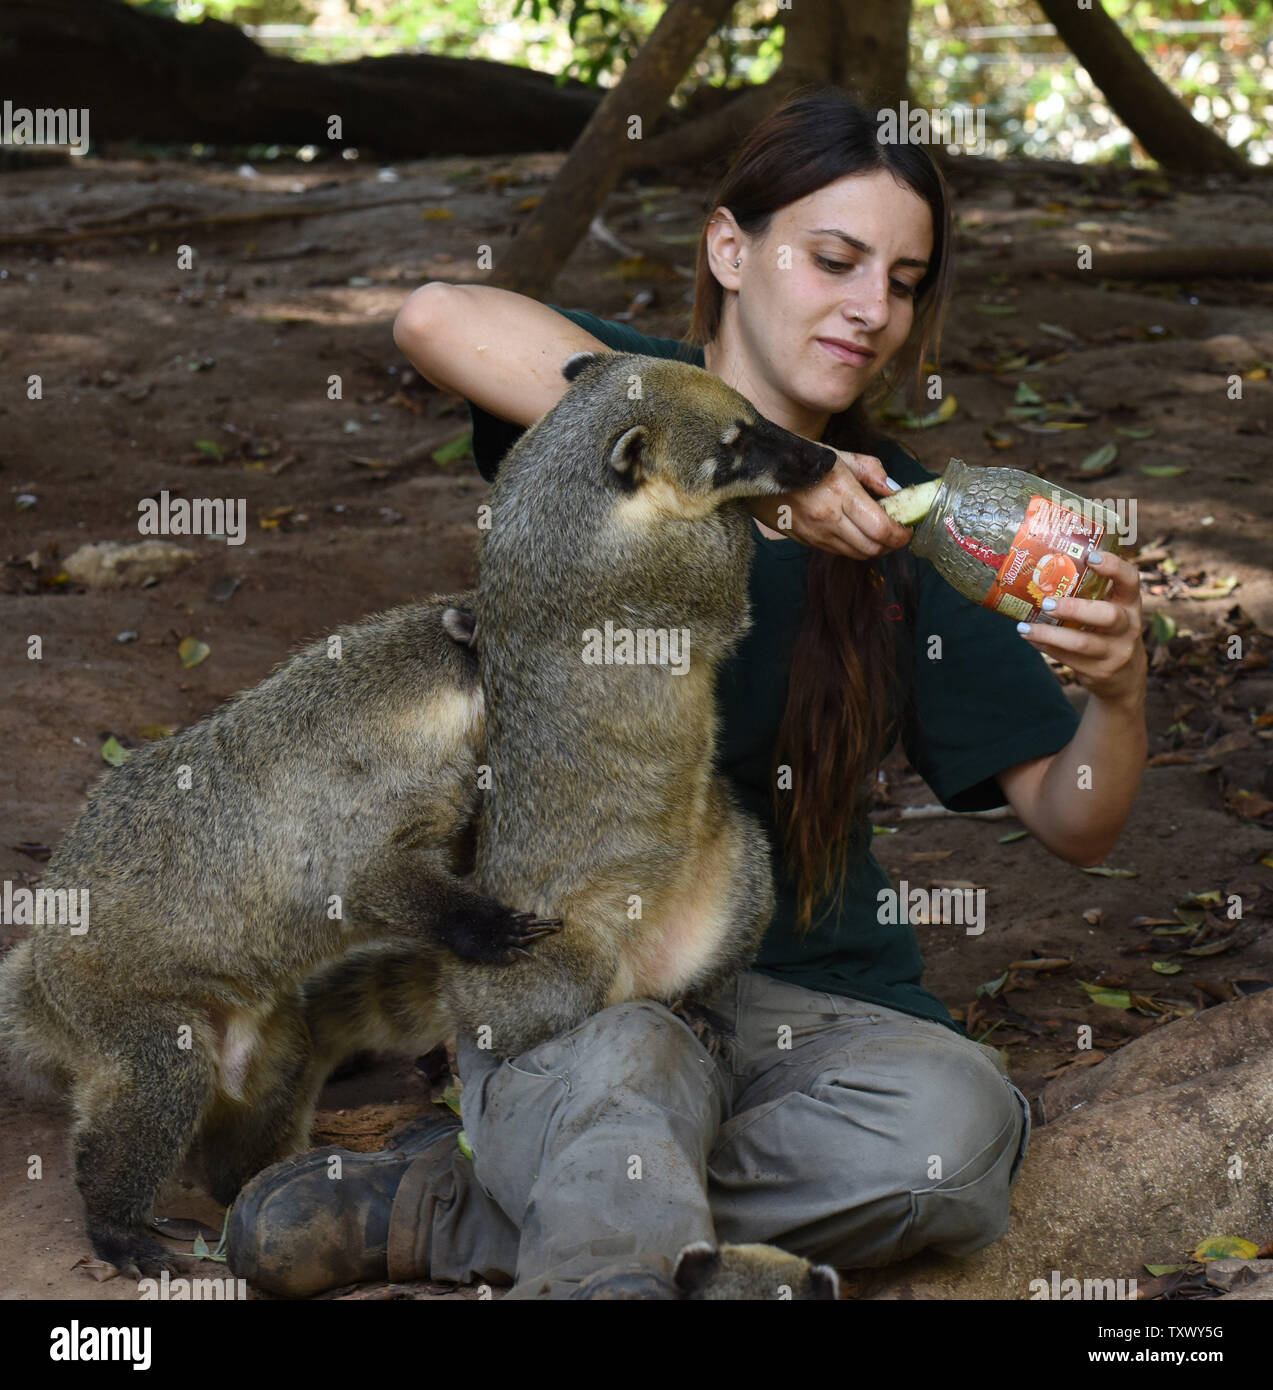 Israeli zookeeper Bar Braitbart dips an apple in honey to feed  South American Coatis in honor of the upcoming Jewish New Year, Rosh HaShanah, at the Ramat Gan Safari, near Tel Aviv, Israel, September 17, 2017. Jews around the world eat apples dipped in honey on Rosh HaShanah to symbolize hope that the coming year will be 'sweet.' Photo by Debbie Hill/UPI Stock Photo